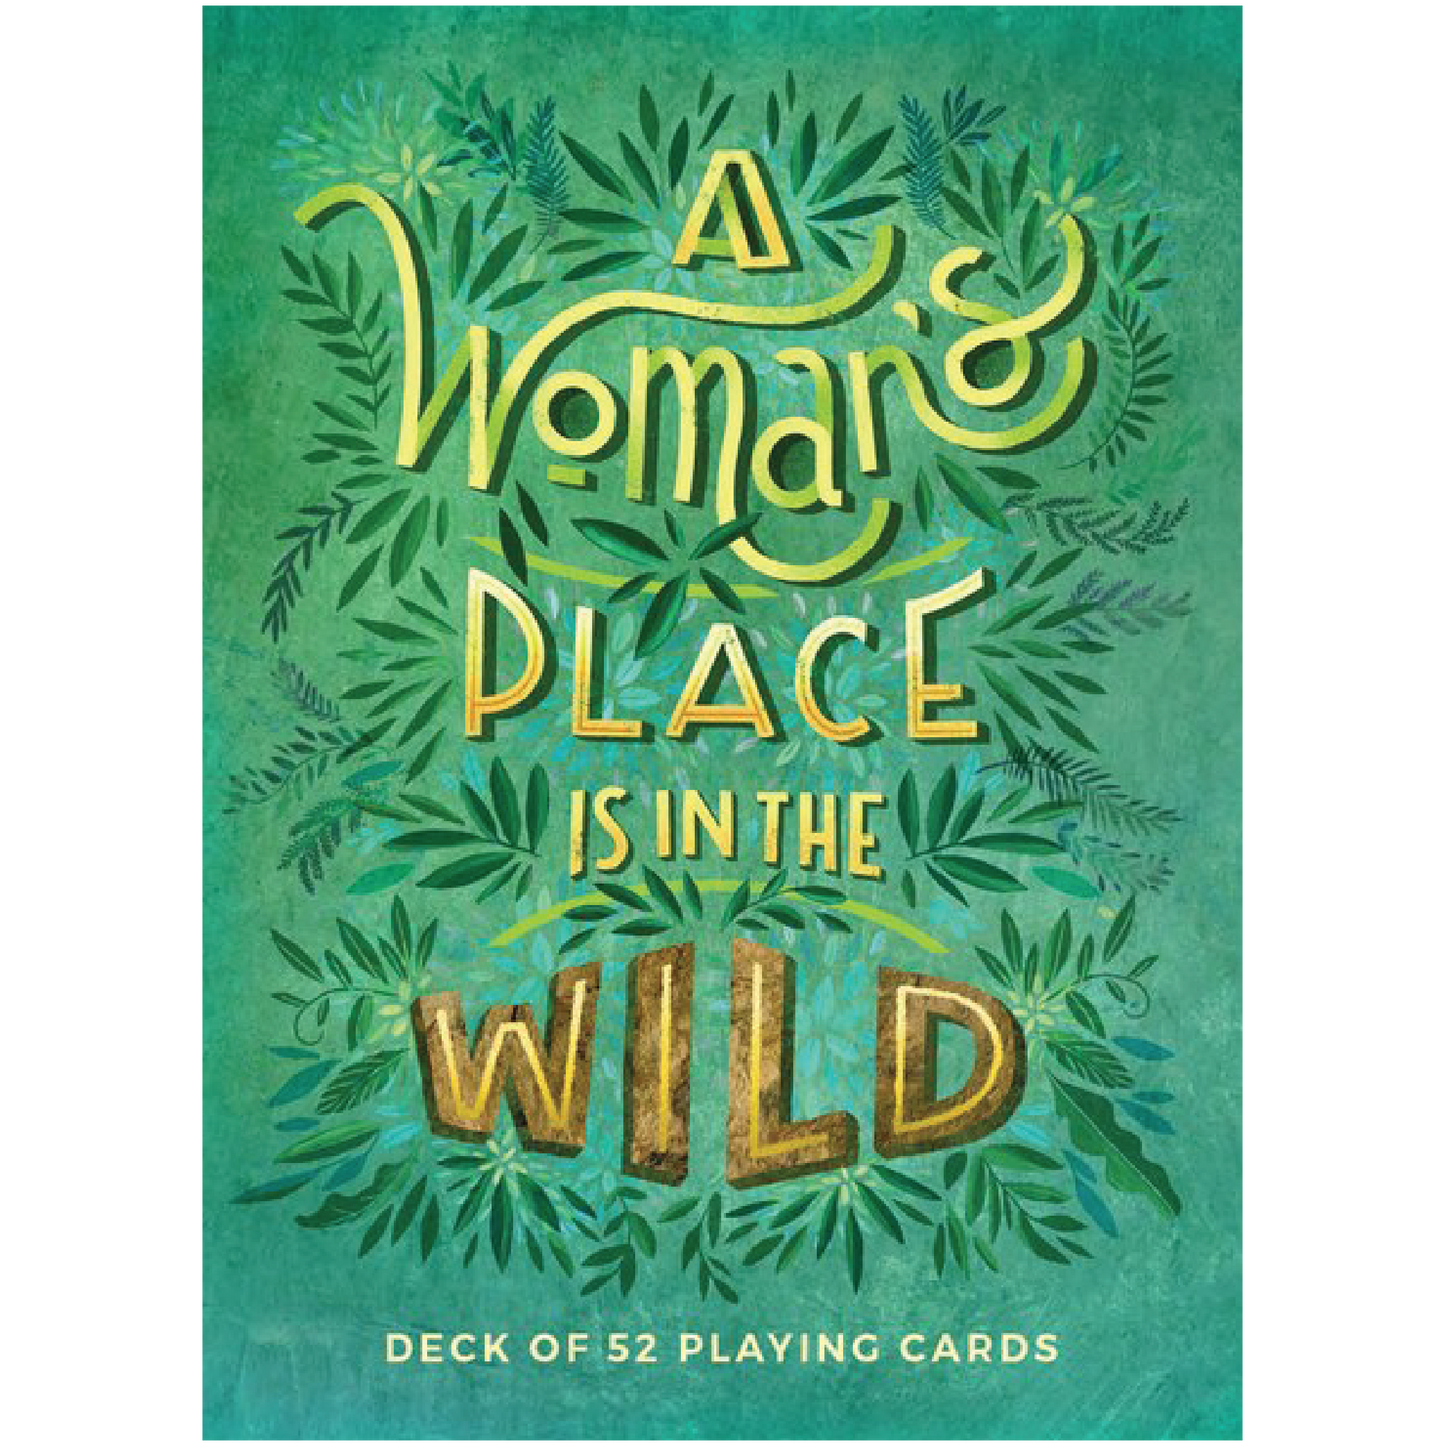 A Woman's Place Is in the Wild : Deck of 52 Playing Cards